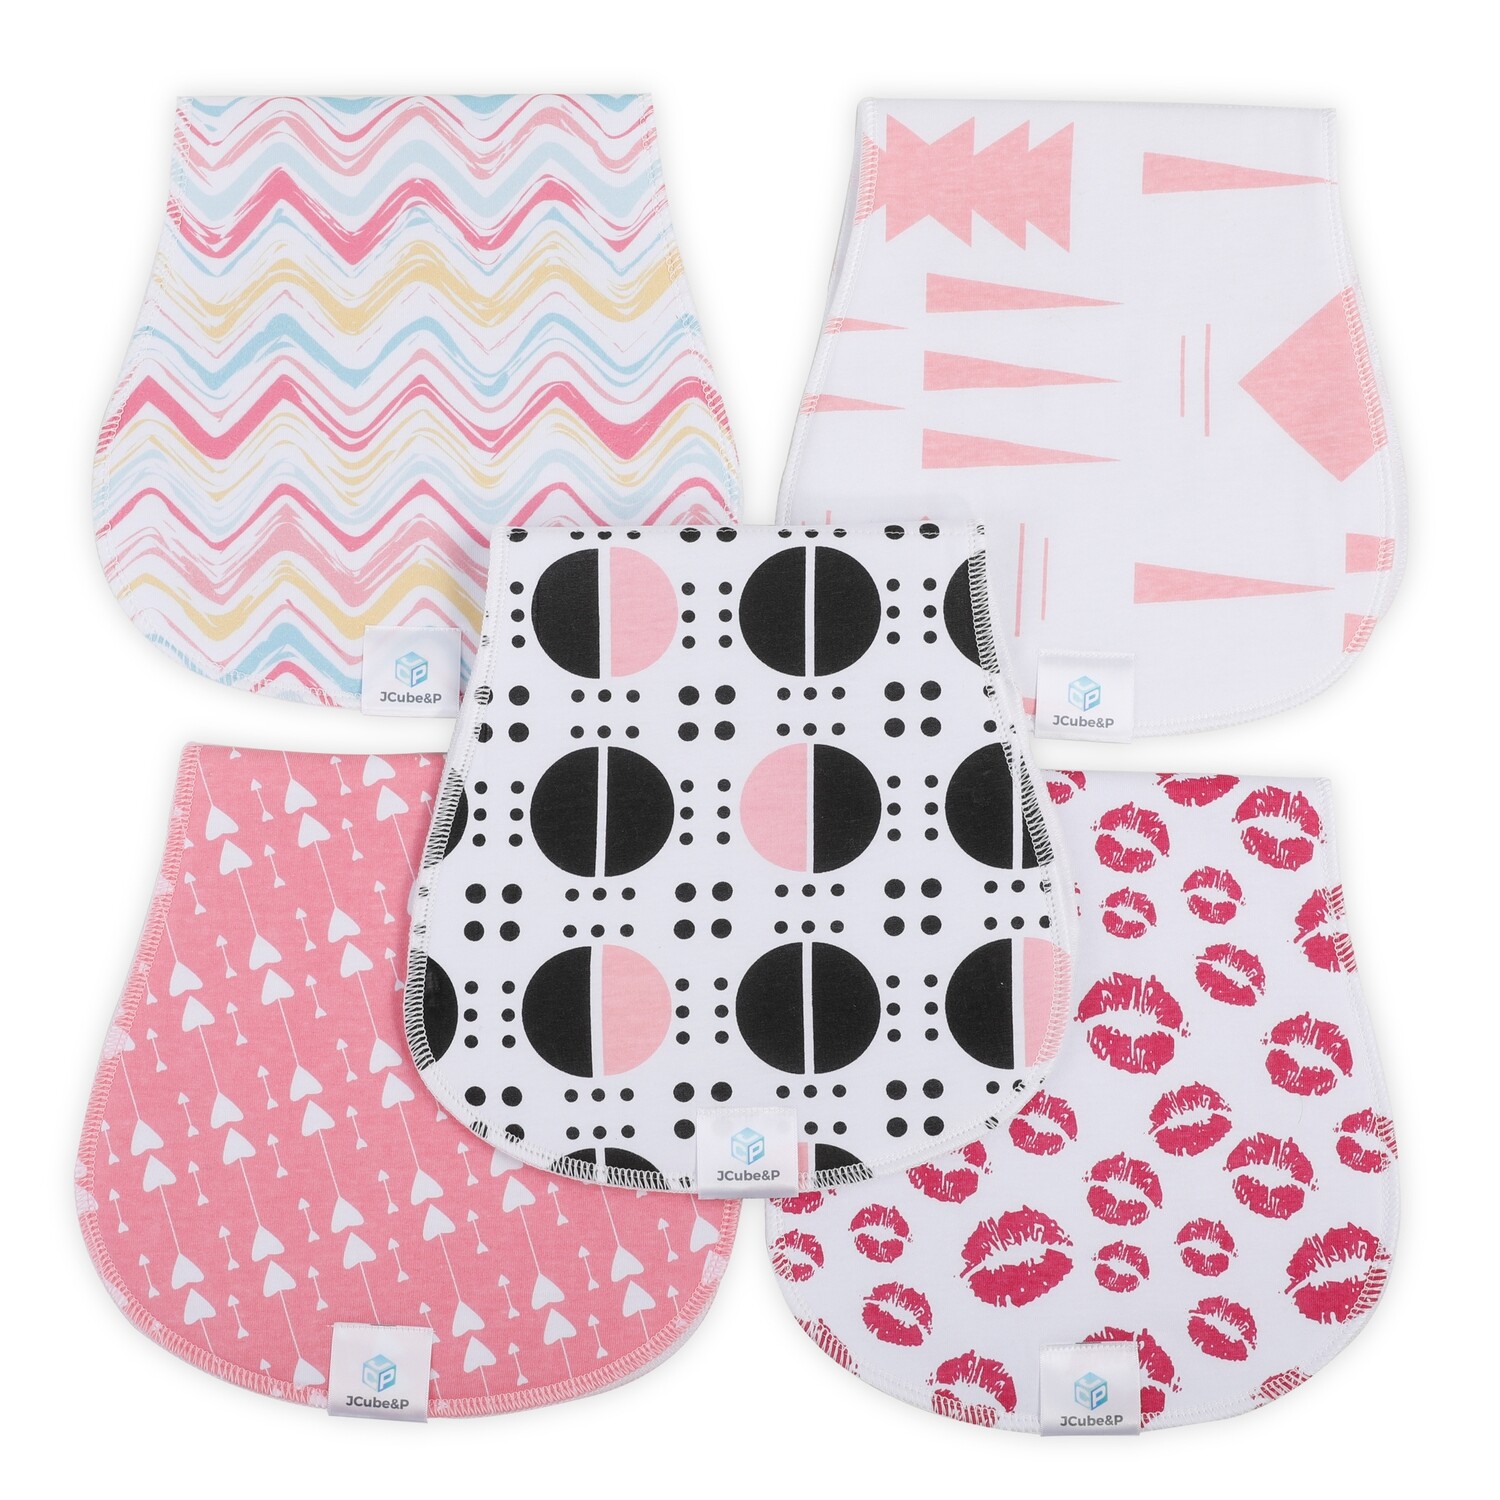 Burp Cloths Made of 100% Organic Cotton and Fleece layers - Soft & Absorbent Curvy Designs - Cute 5-Pack Baby Shower Gift Set for Newborns & Infants